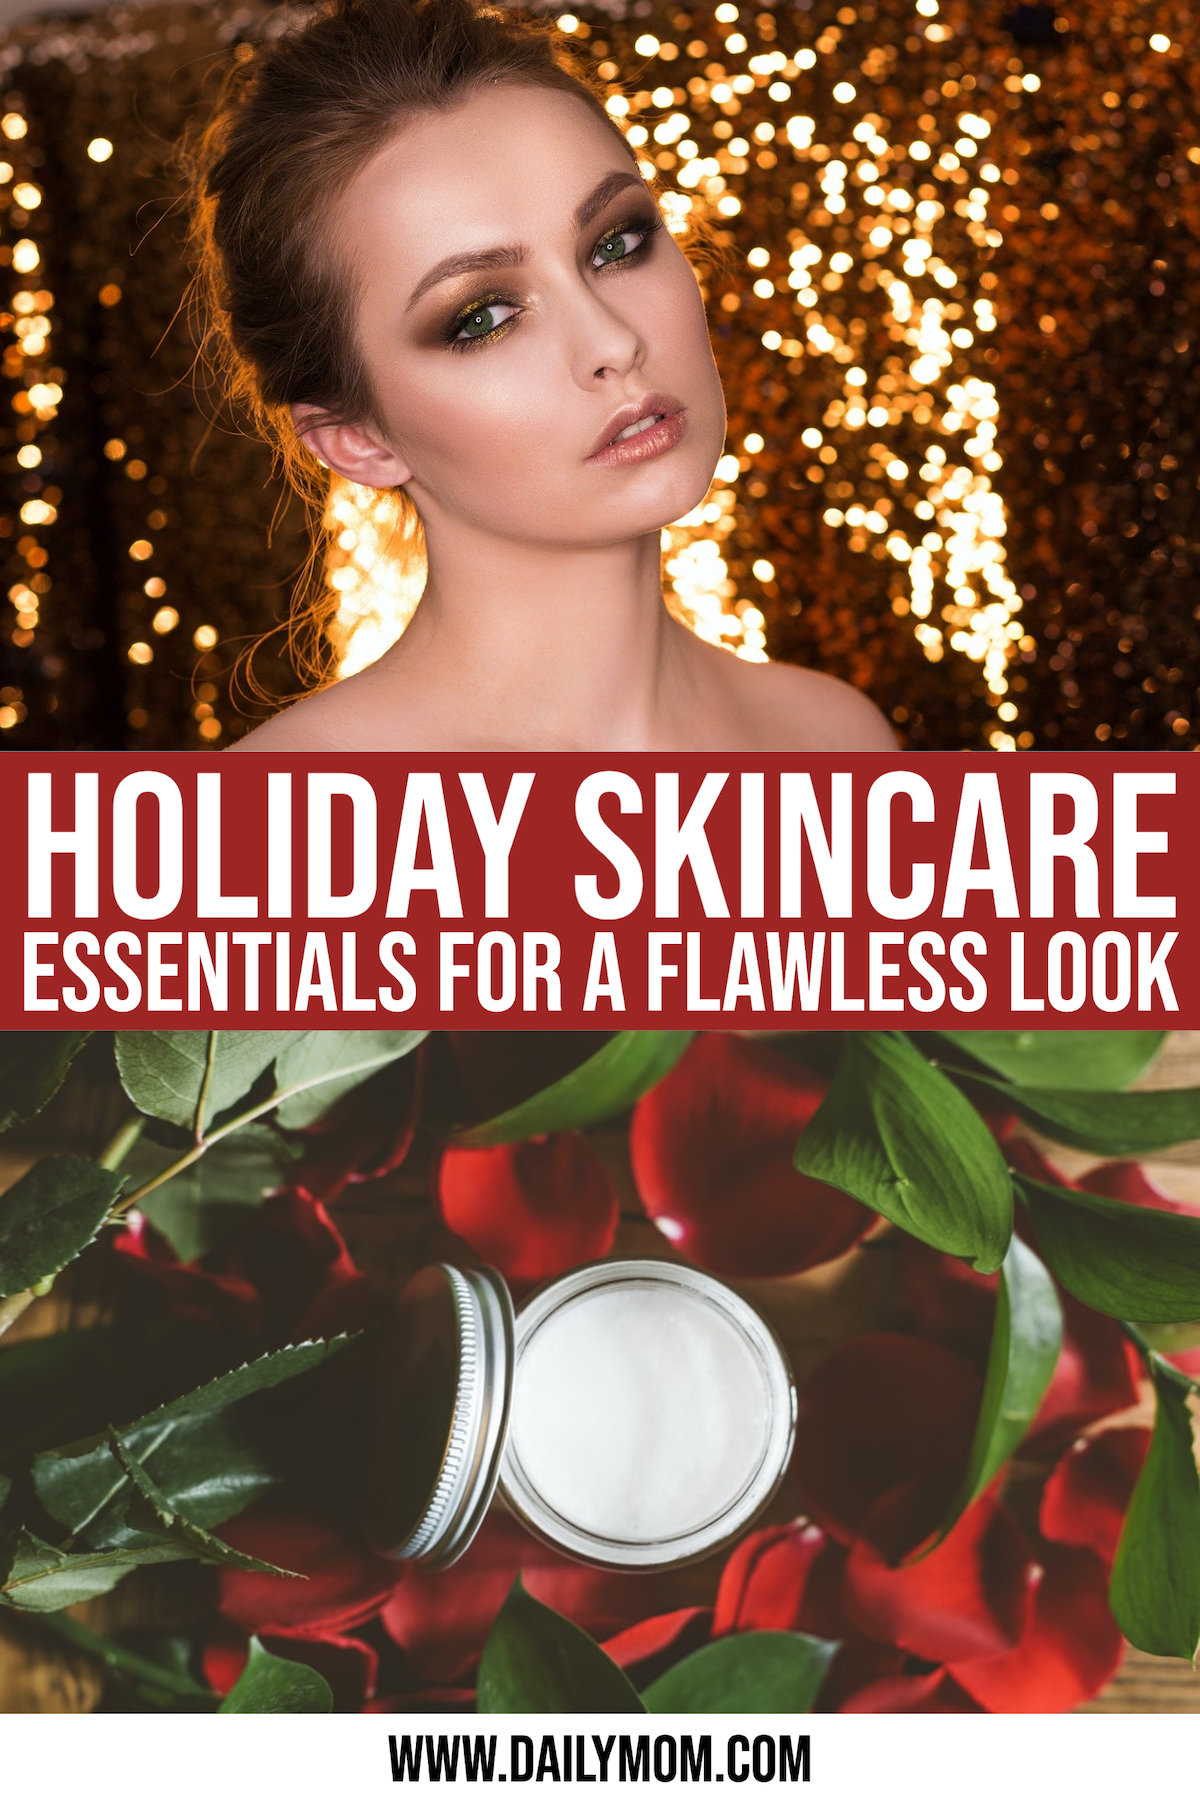 22 Skin Prep Essentials To Make You Look Stunning For The Holidays